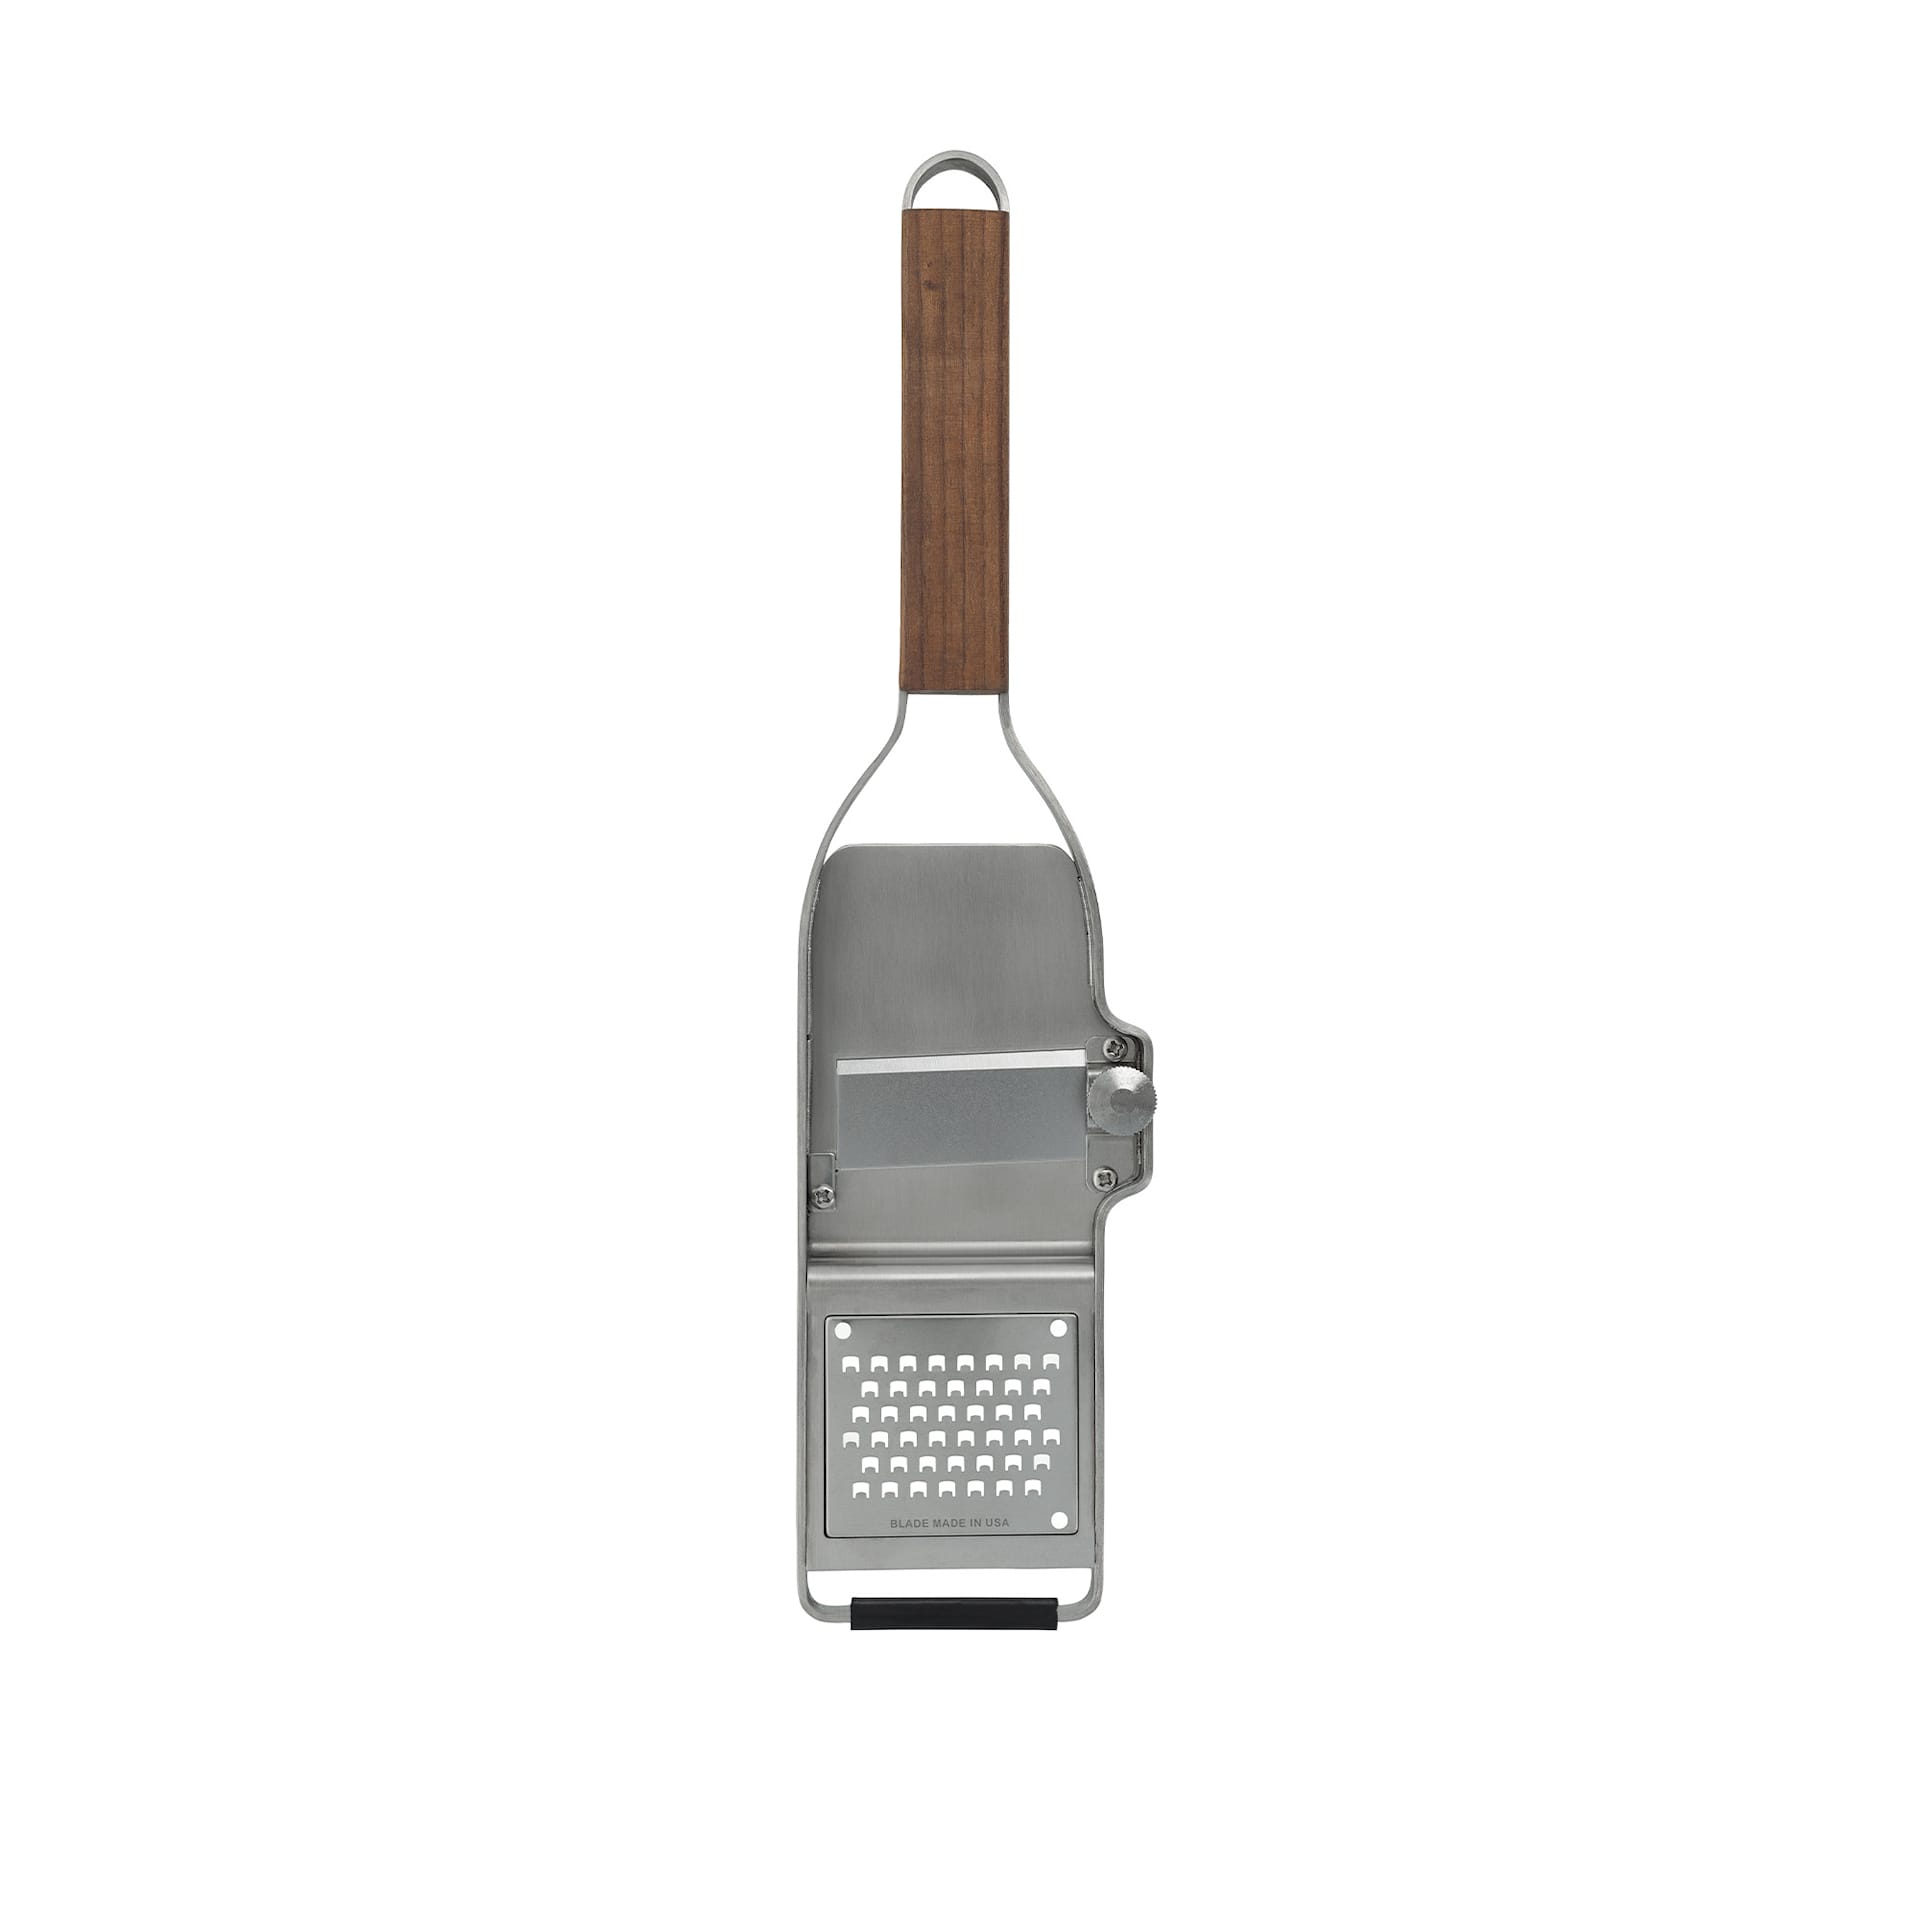 Buy Master Series Truffle Tool 2-in-1 Slicer Grater from Microplane